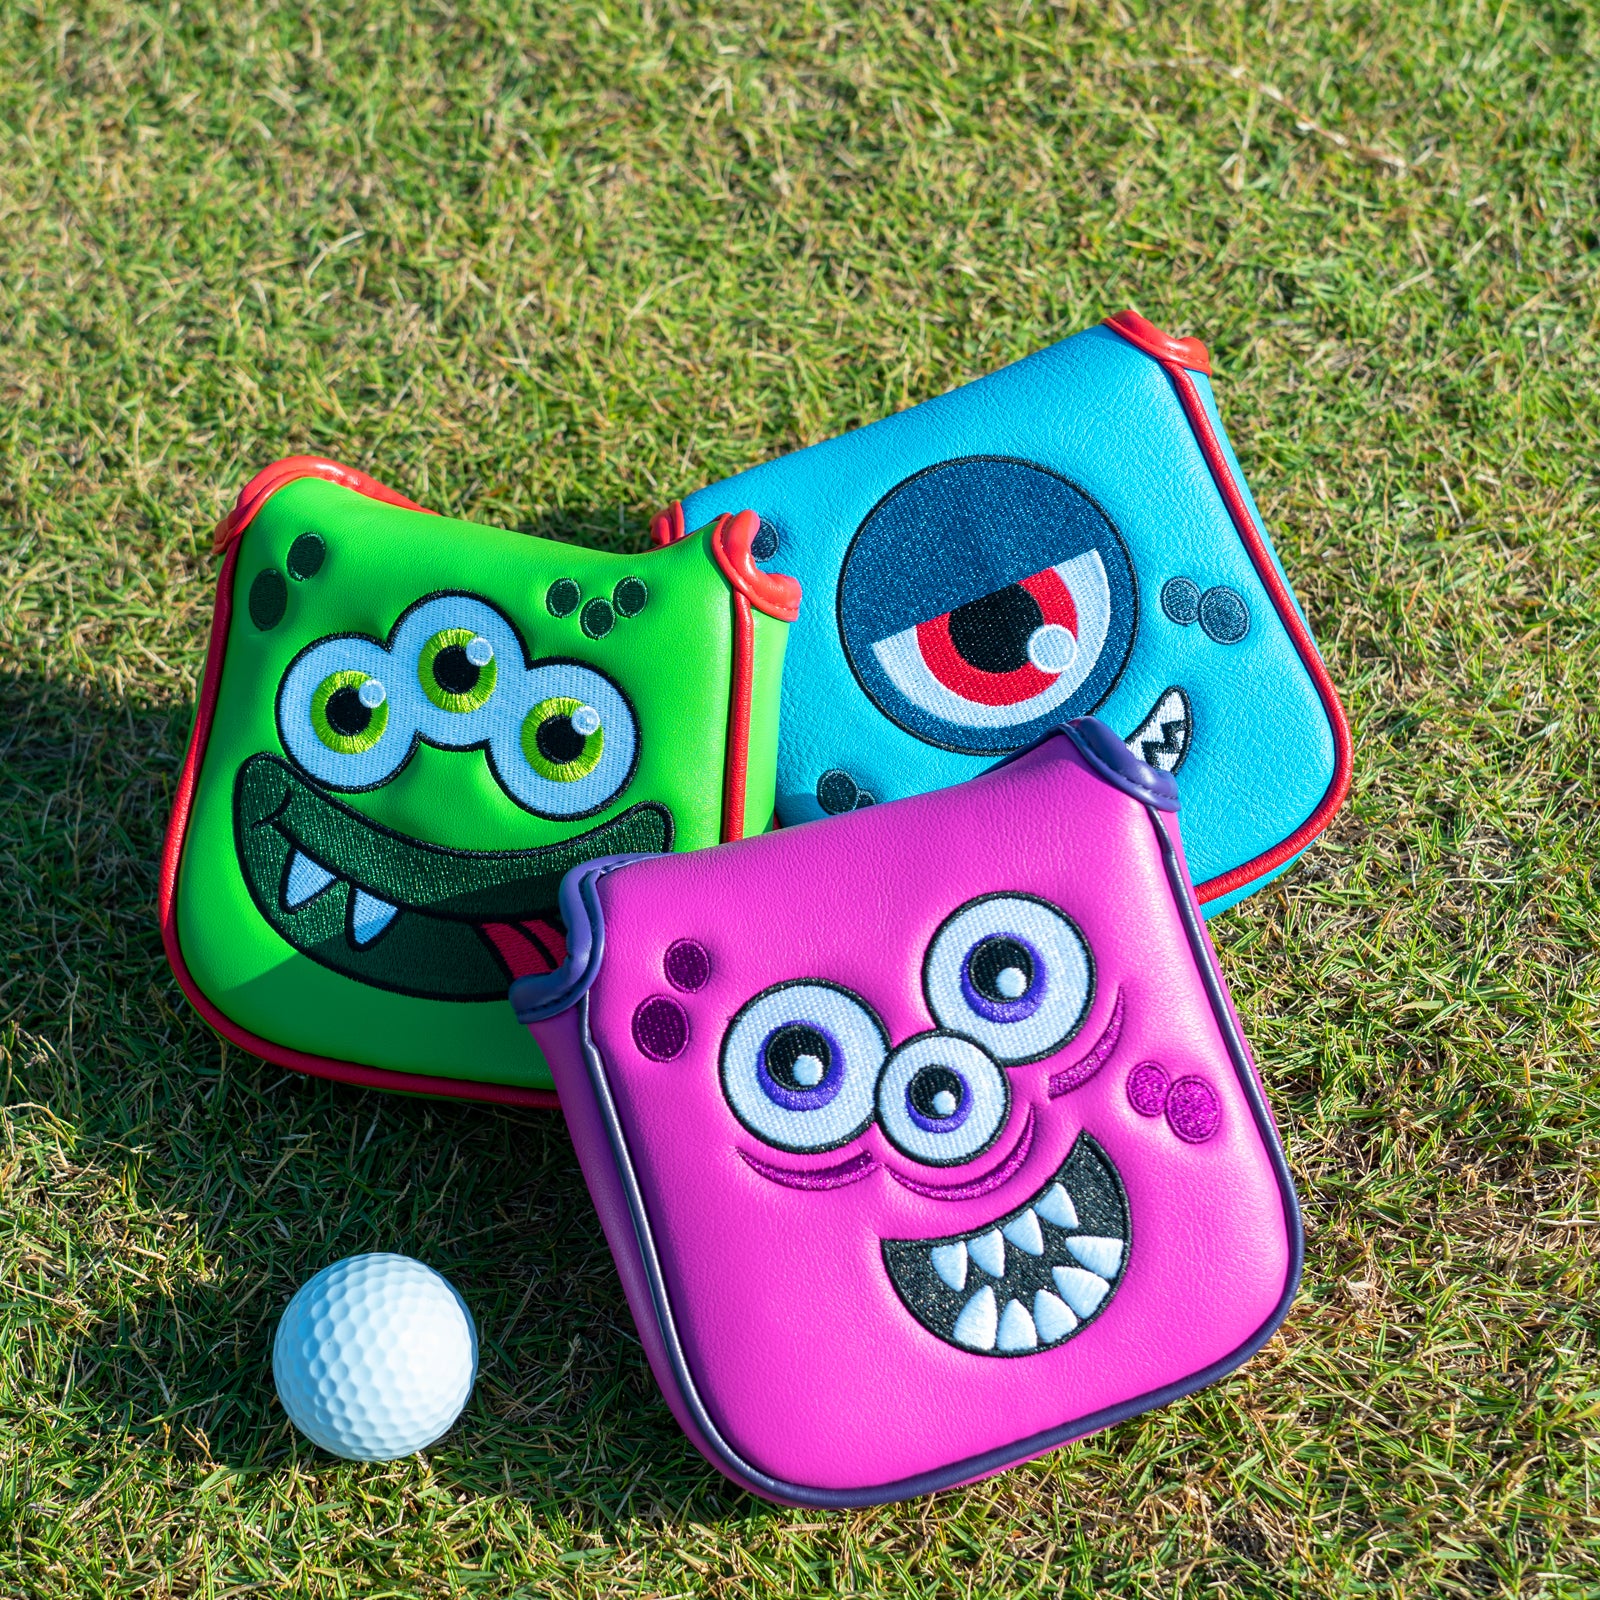 Monster Golf Club Square Mallet Putter Headcover